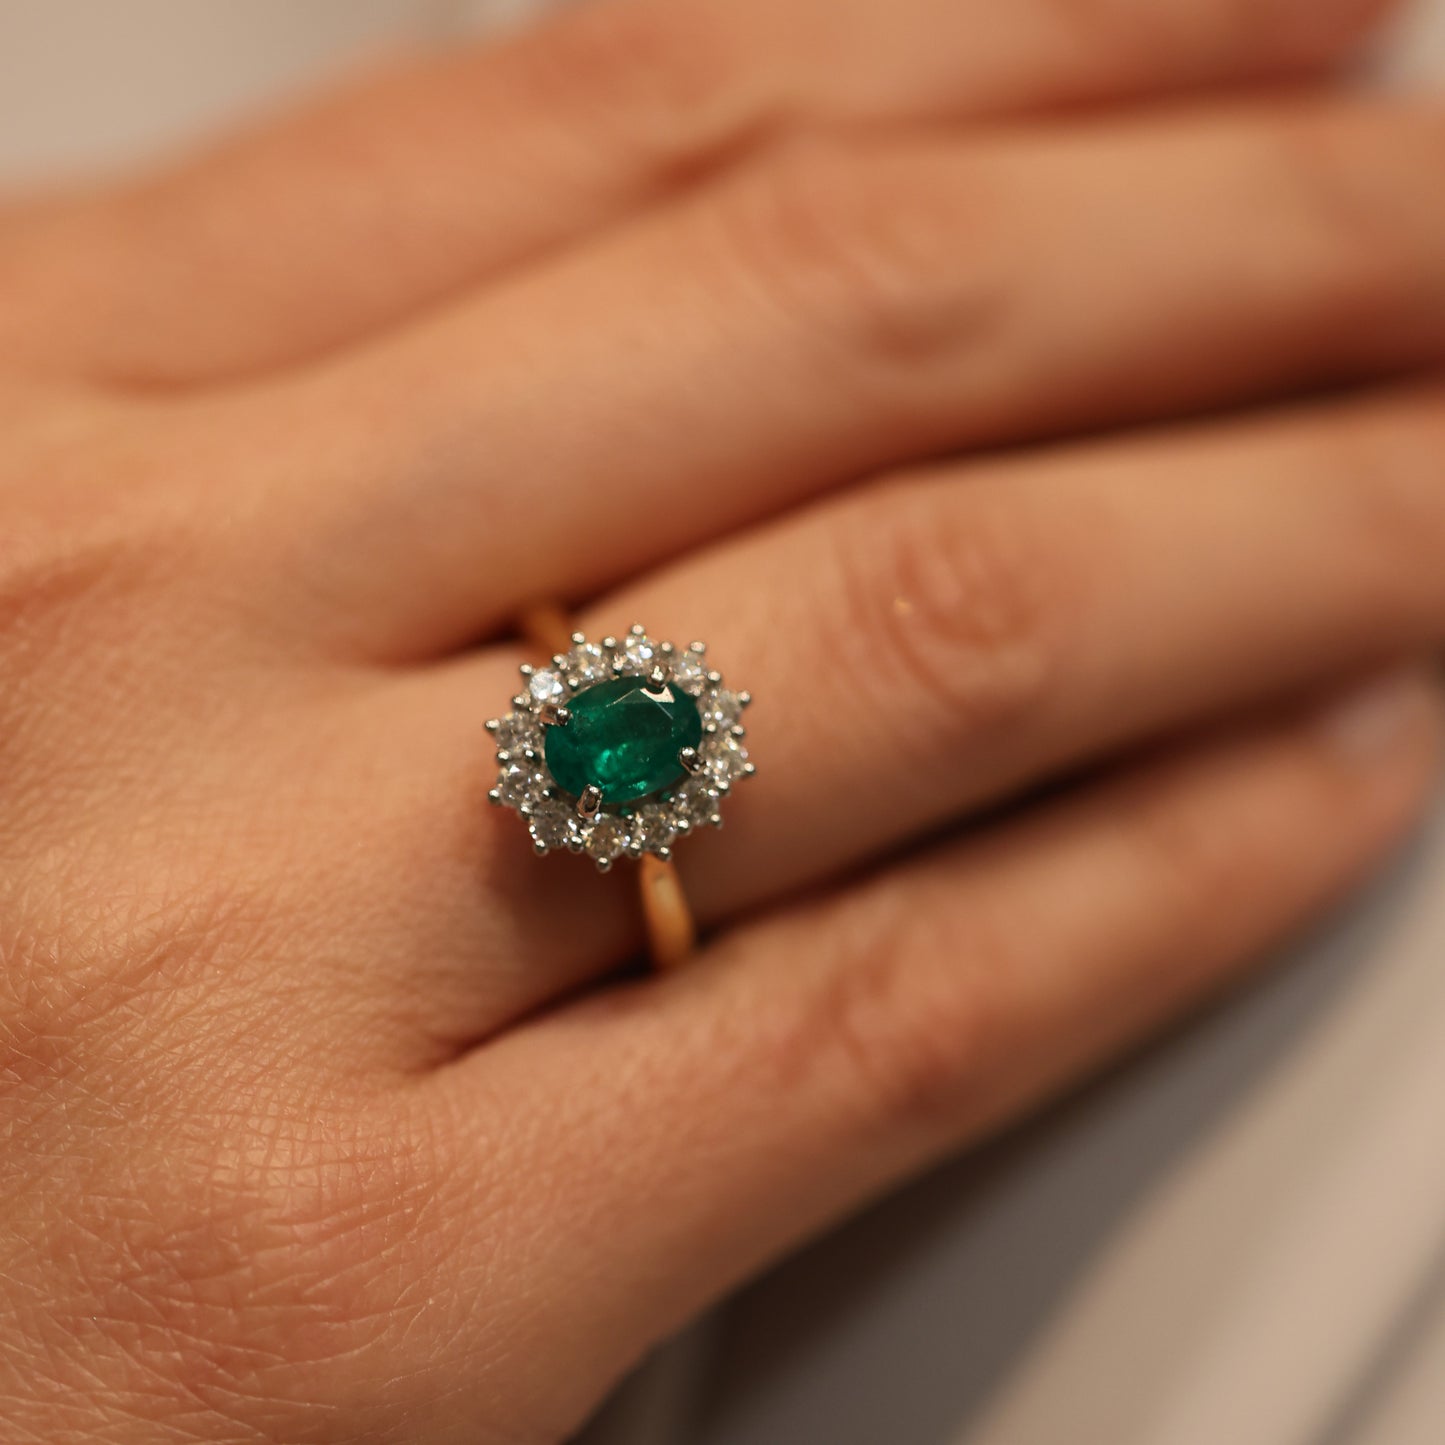 'The Kate' Emerald Ring